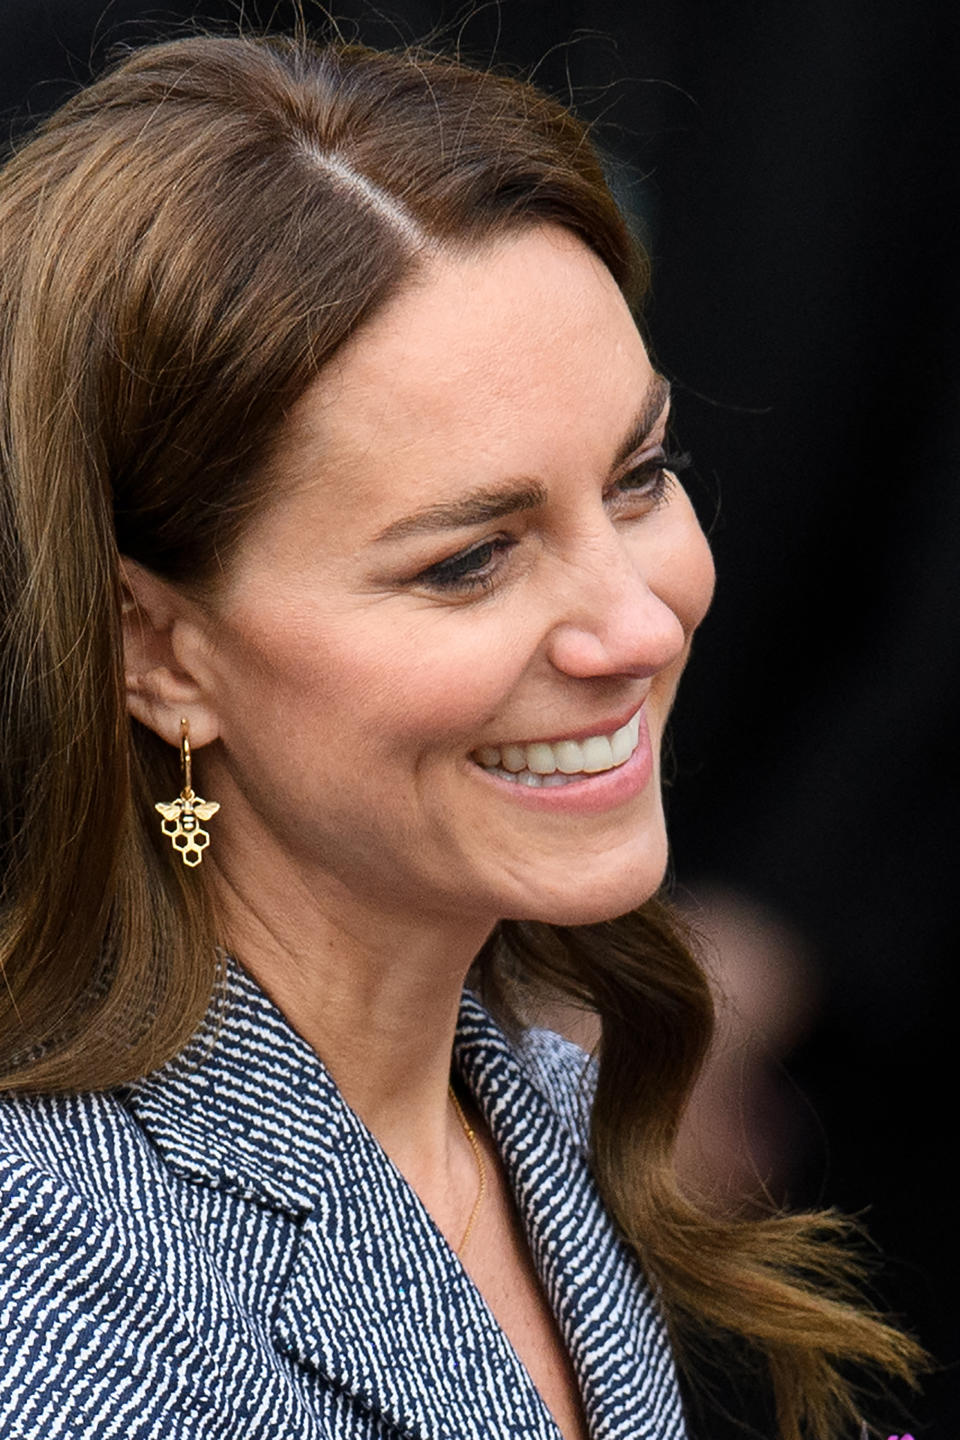 The Duchess of Cambridge wore a bee earring design, which is a symbol of Manchester, as she met with the Manchester Arena victims' families. (Getty Images)